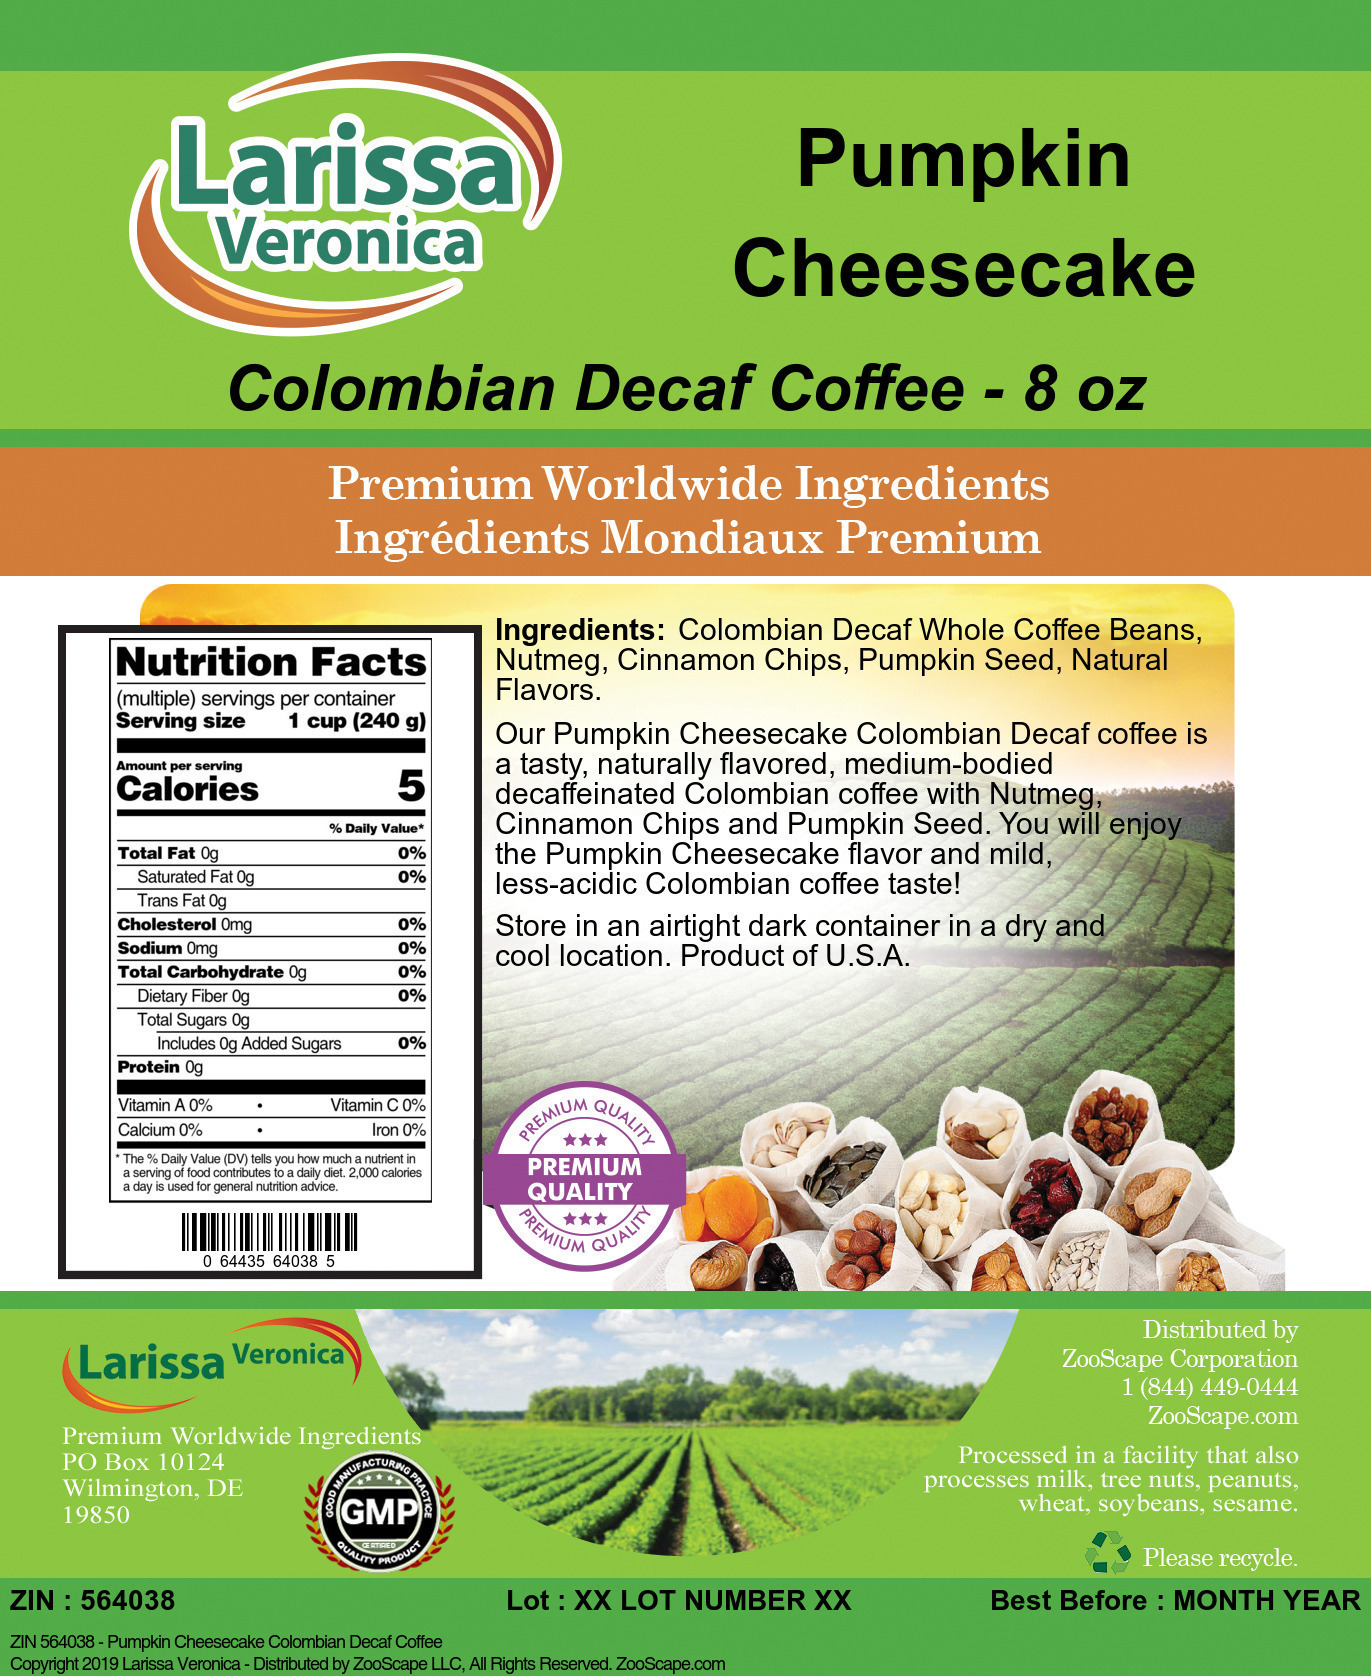 Pumpkin Cheesecake Colombian Decaf Coffee - Label